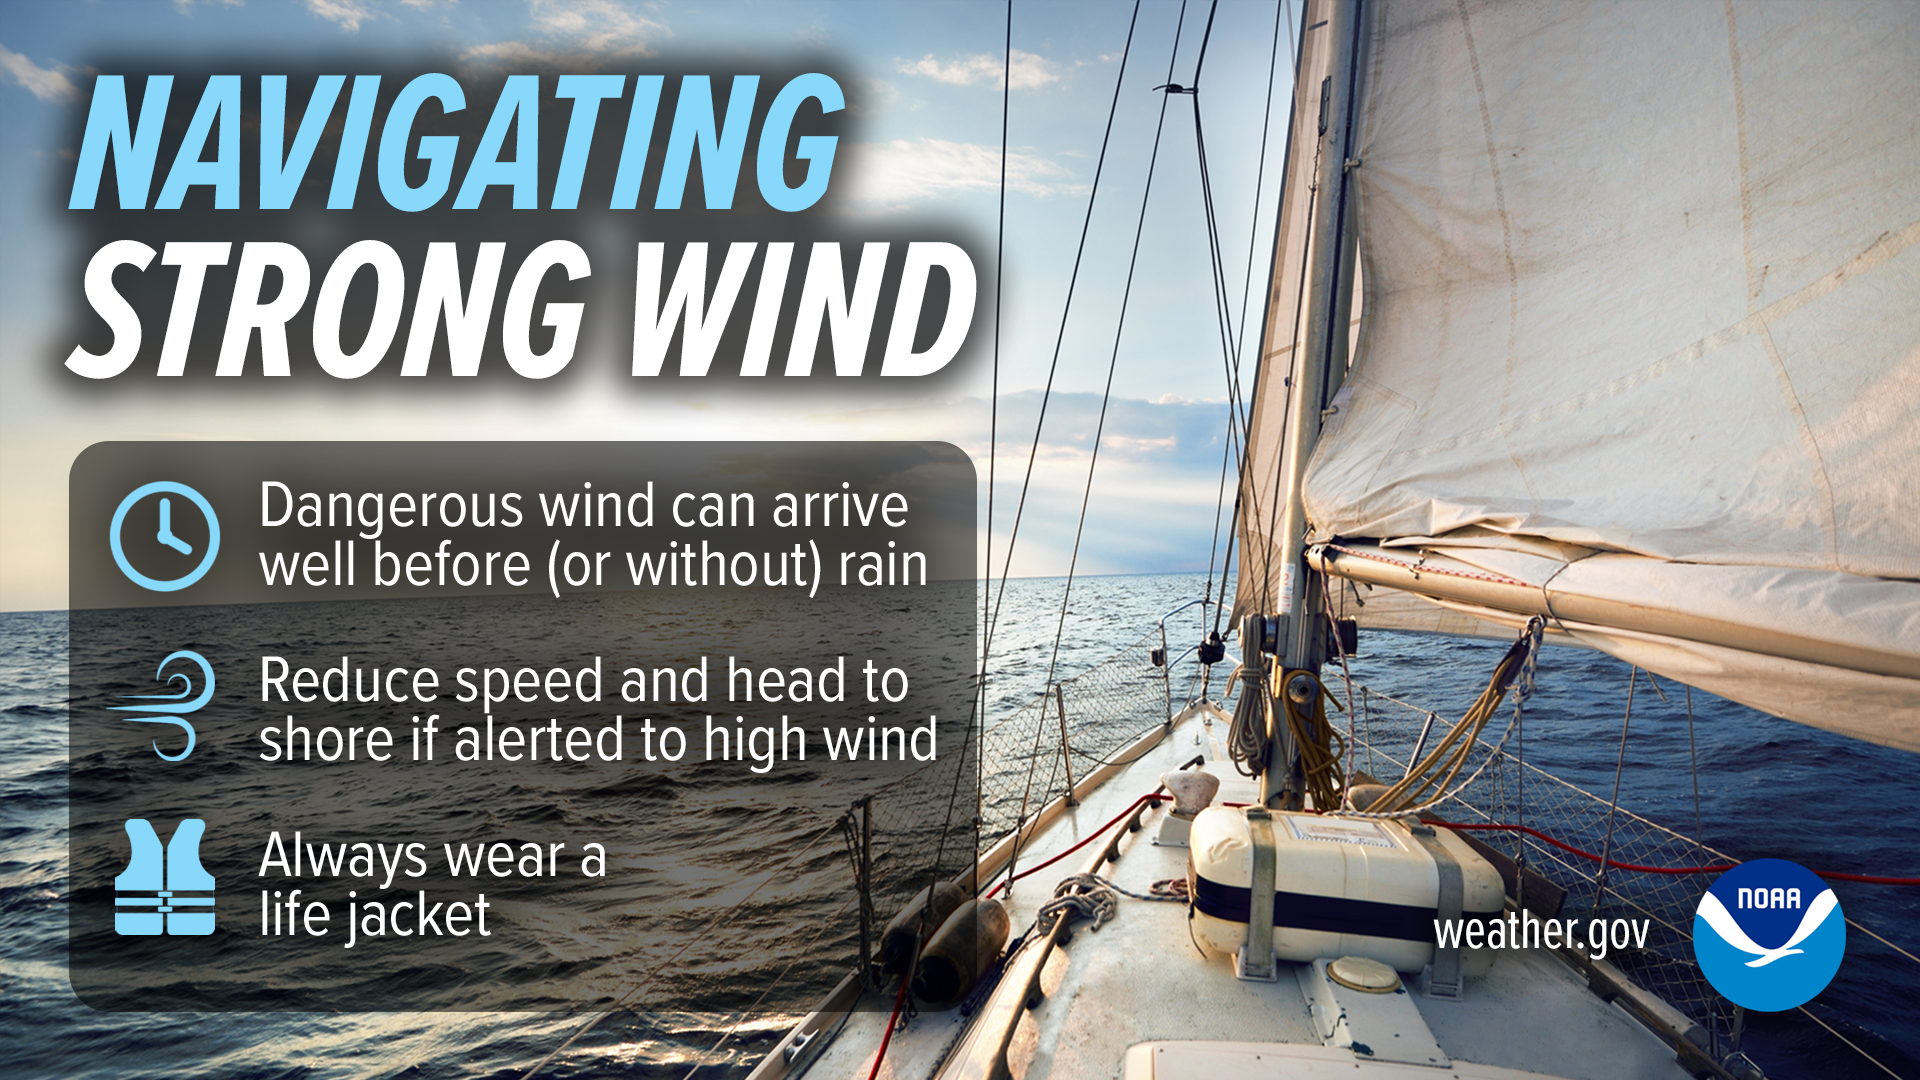 Navigating Strong Wind. Dangerous wind can arrive well before (or without) rain. Reduce speed and head to shore if alerted to high wind. Always wear a life jacket.